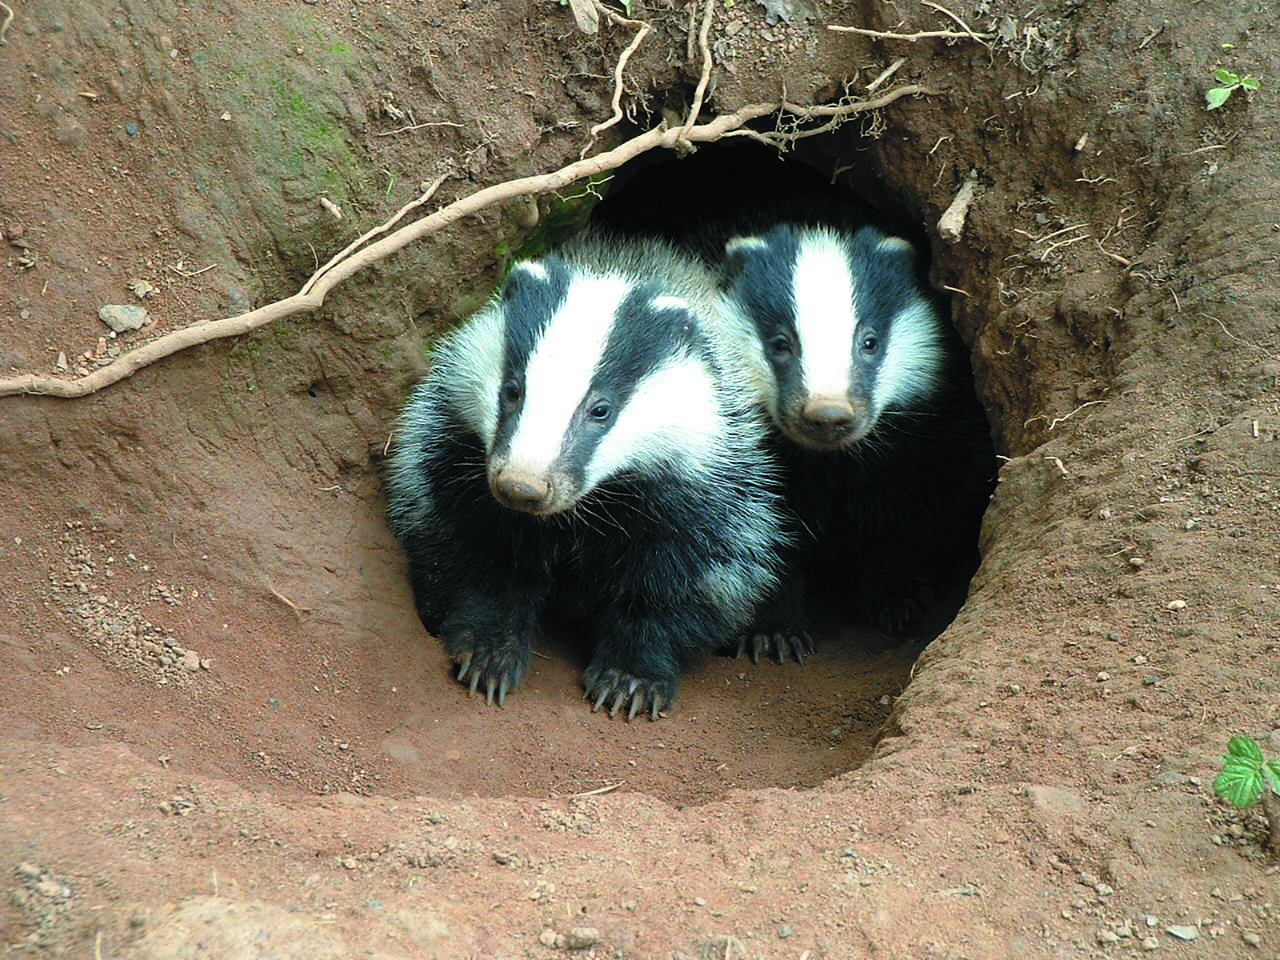 Two badgers are poking their heads our of a sett dug into the earth